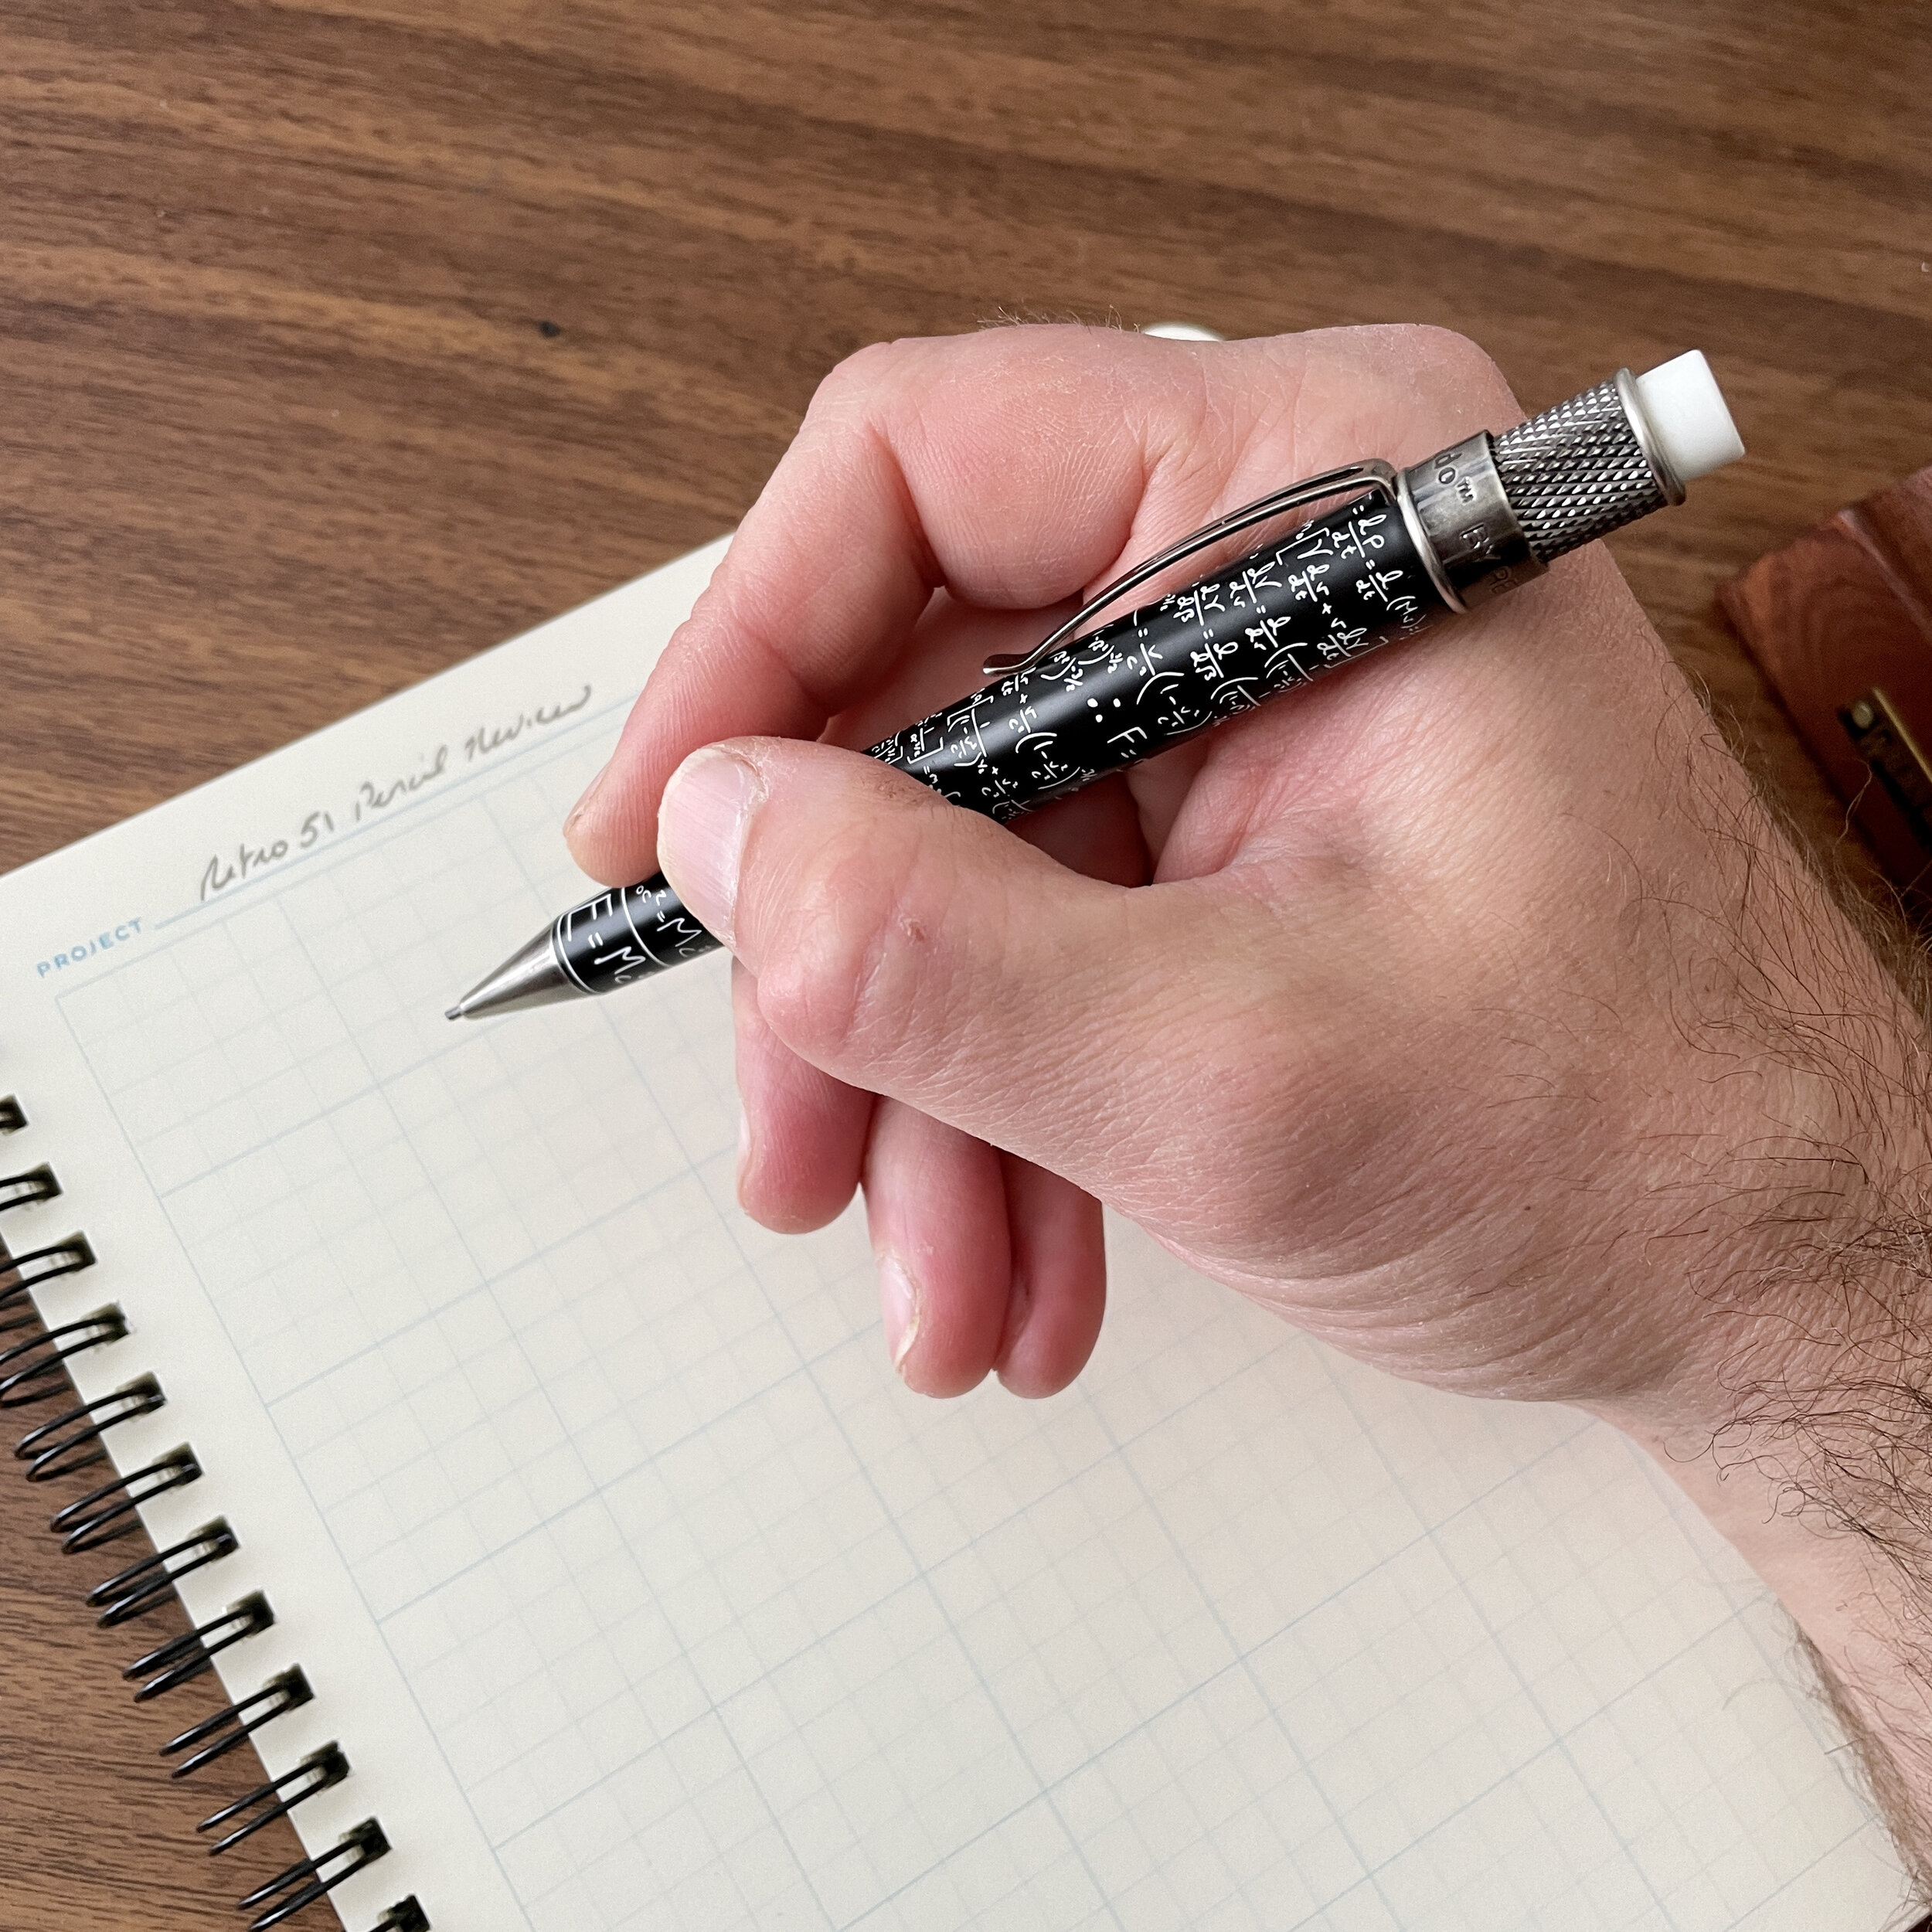 Another Modern Classic: The Rotring 600 Pencil — The Gentleman Stationer